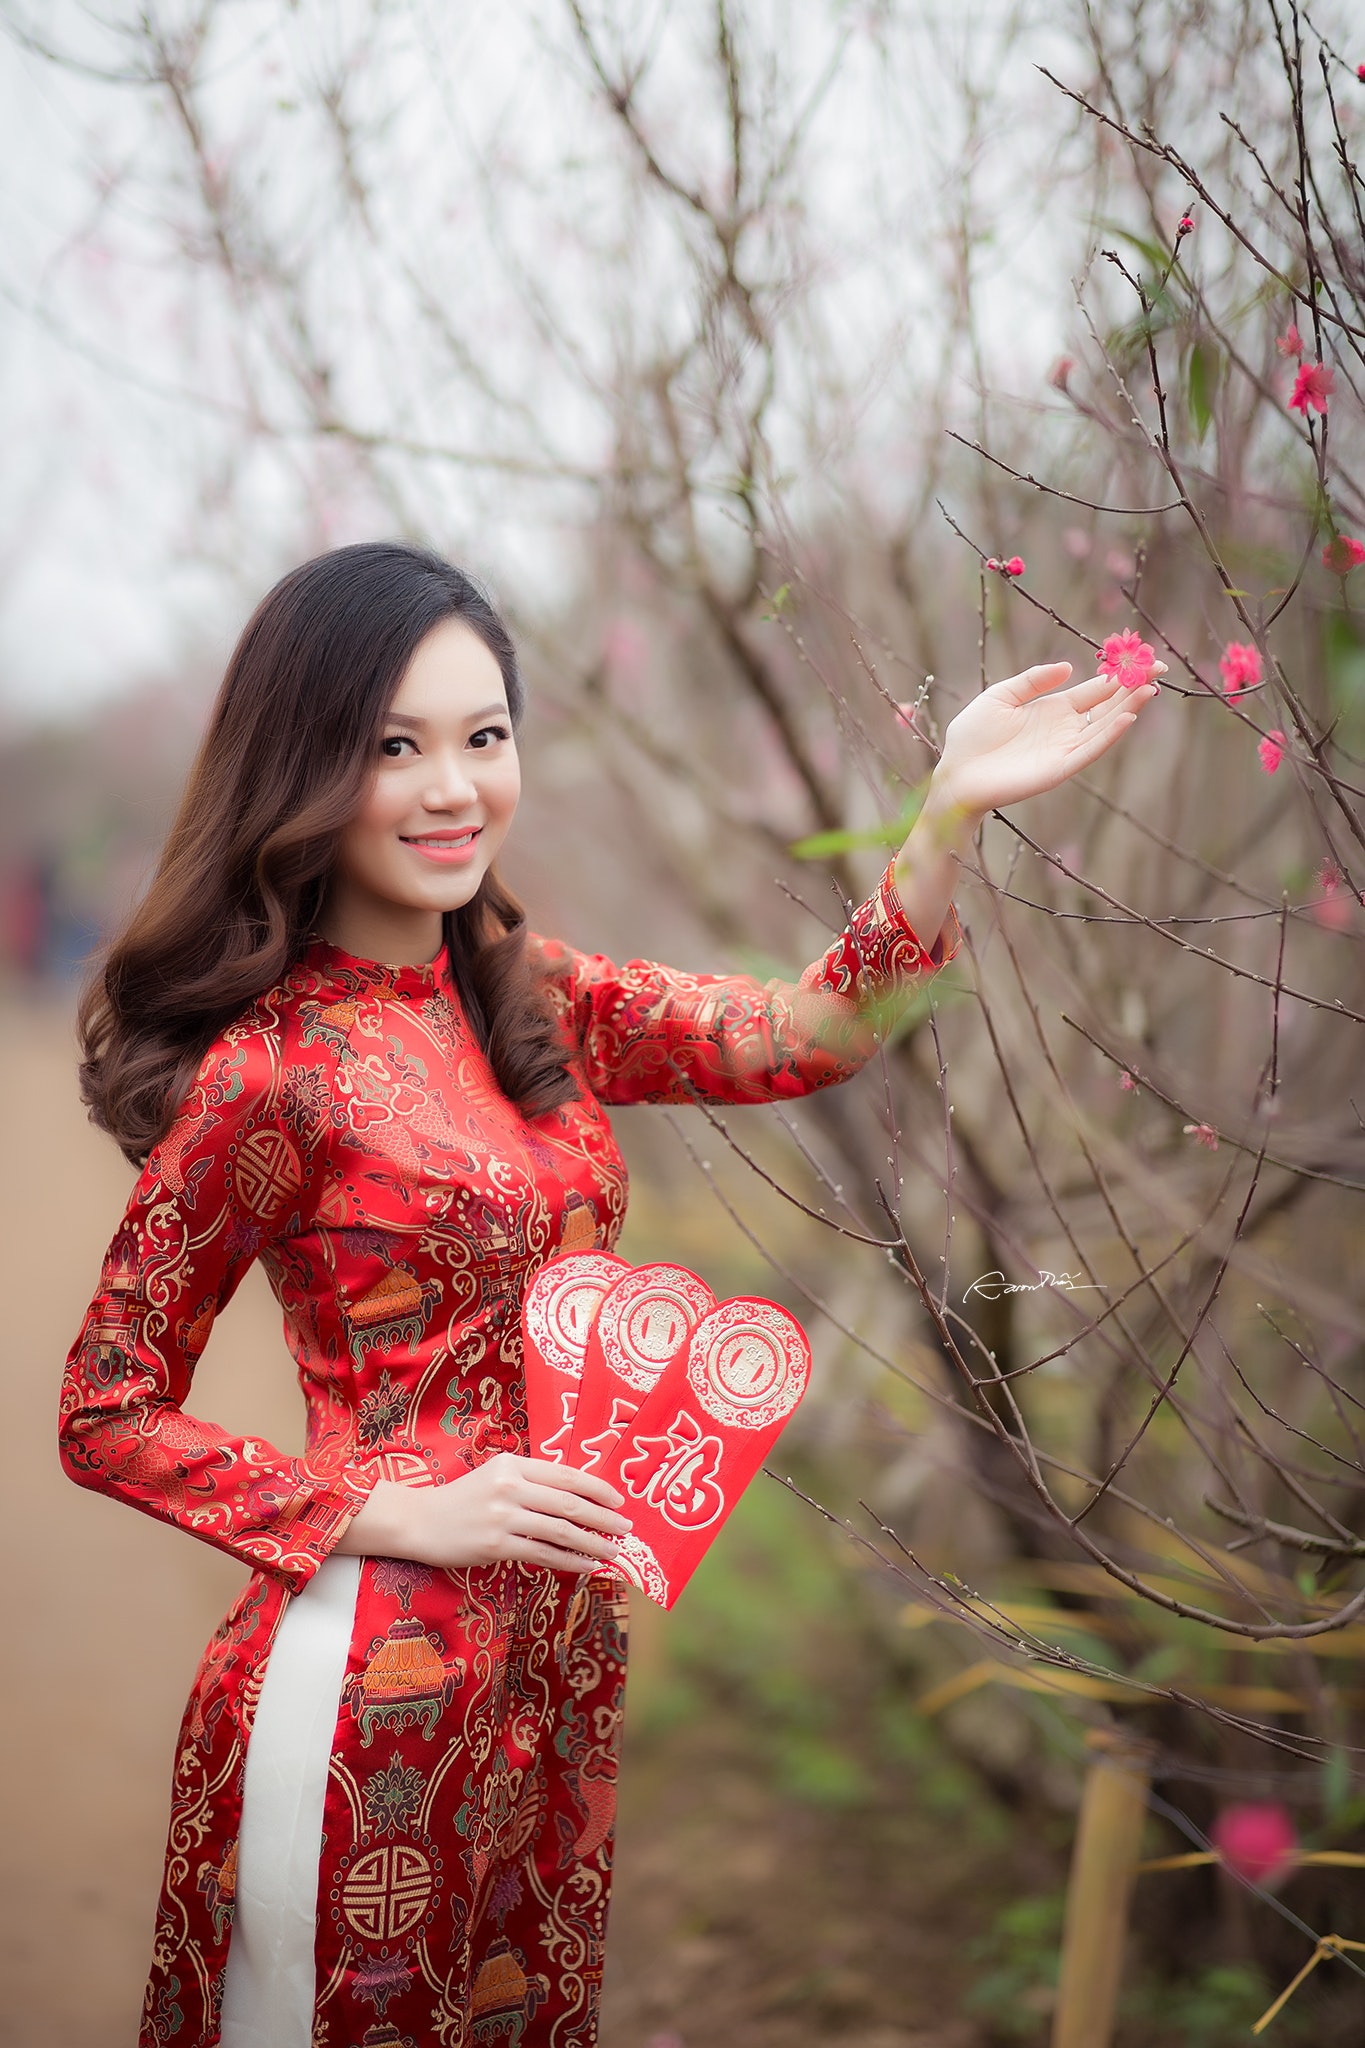 Woman wearing red long-sleeved dress holding pink petaled flower photo